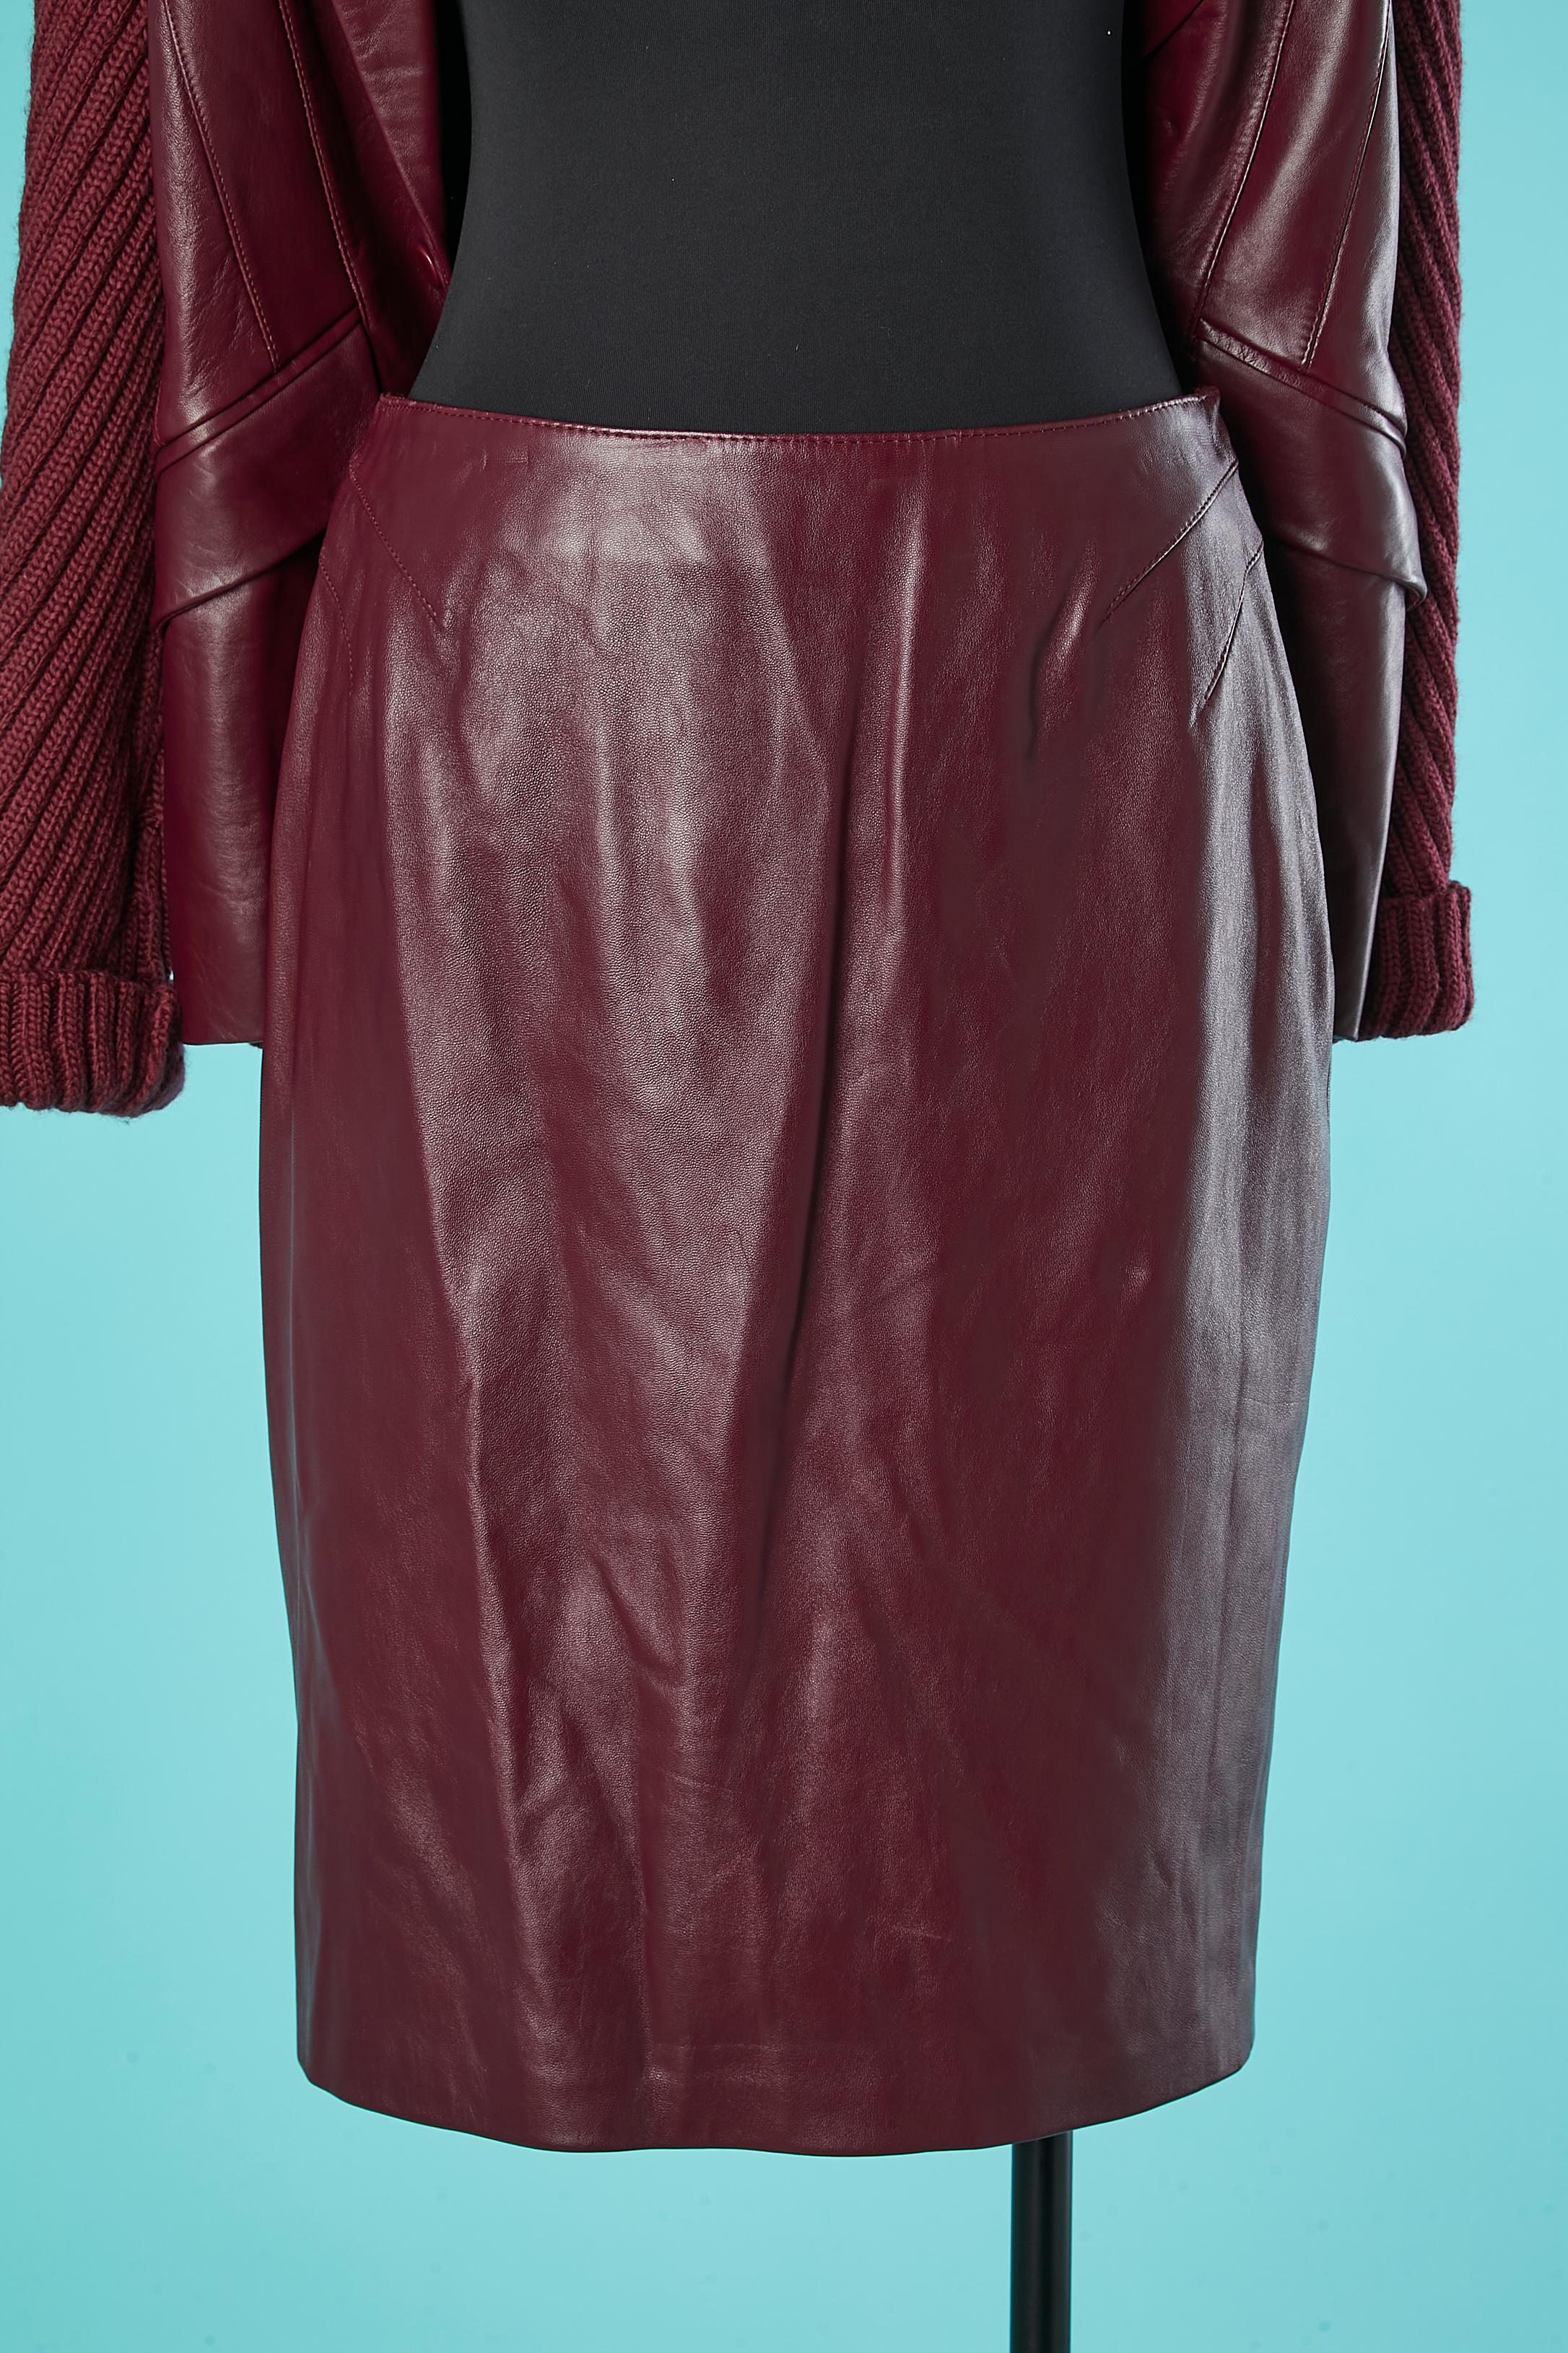 Burgundy skirt-suit in wool knit and leather MUGLER Circa 1990's  For Sale 2